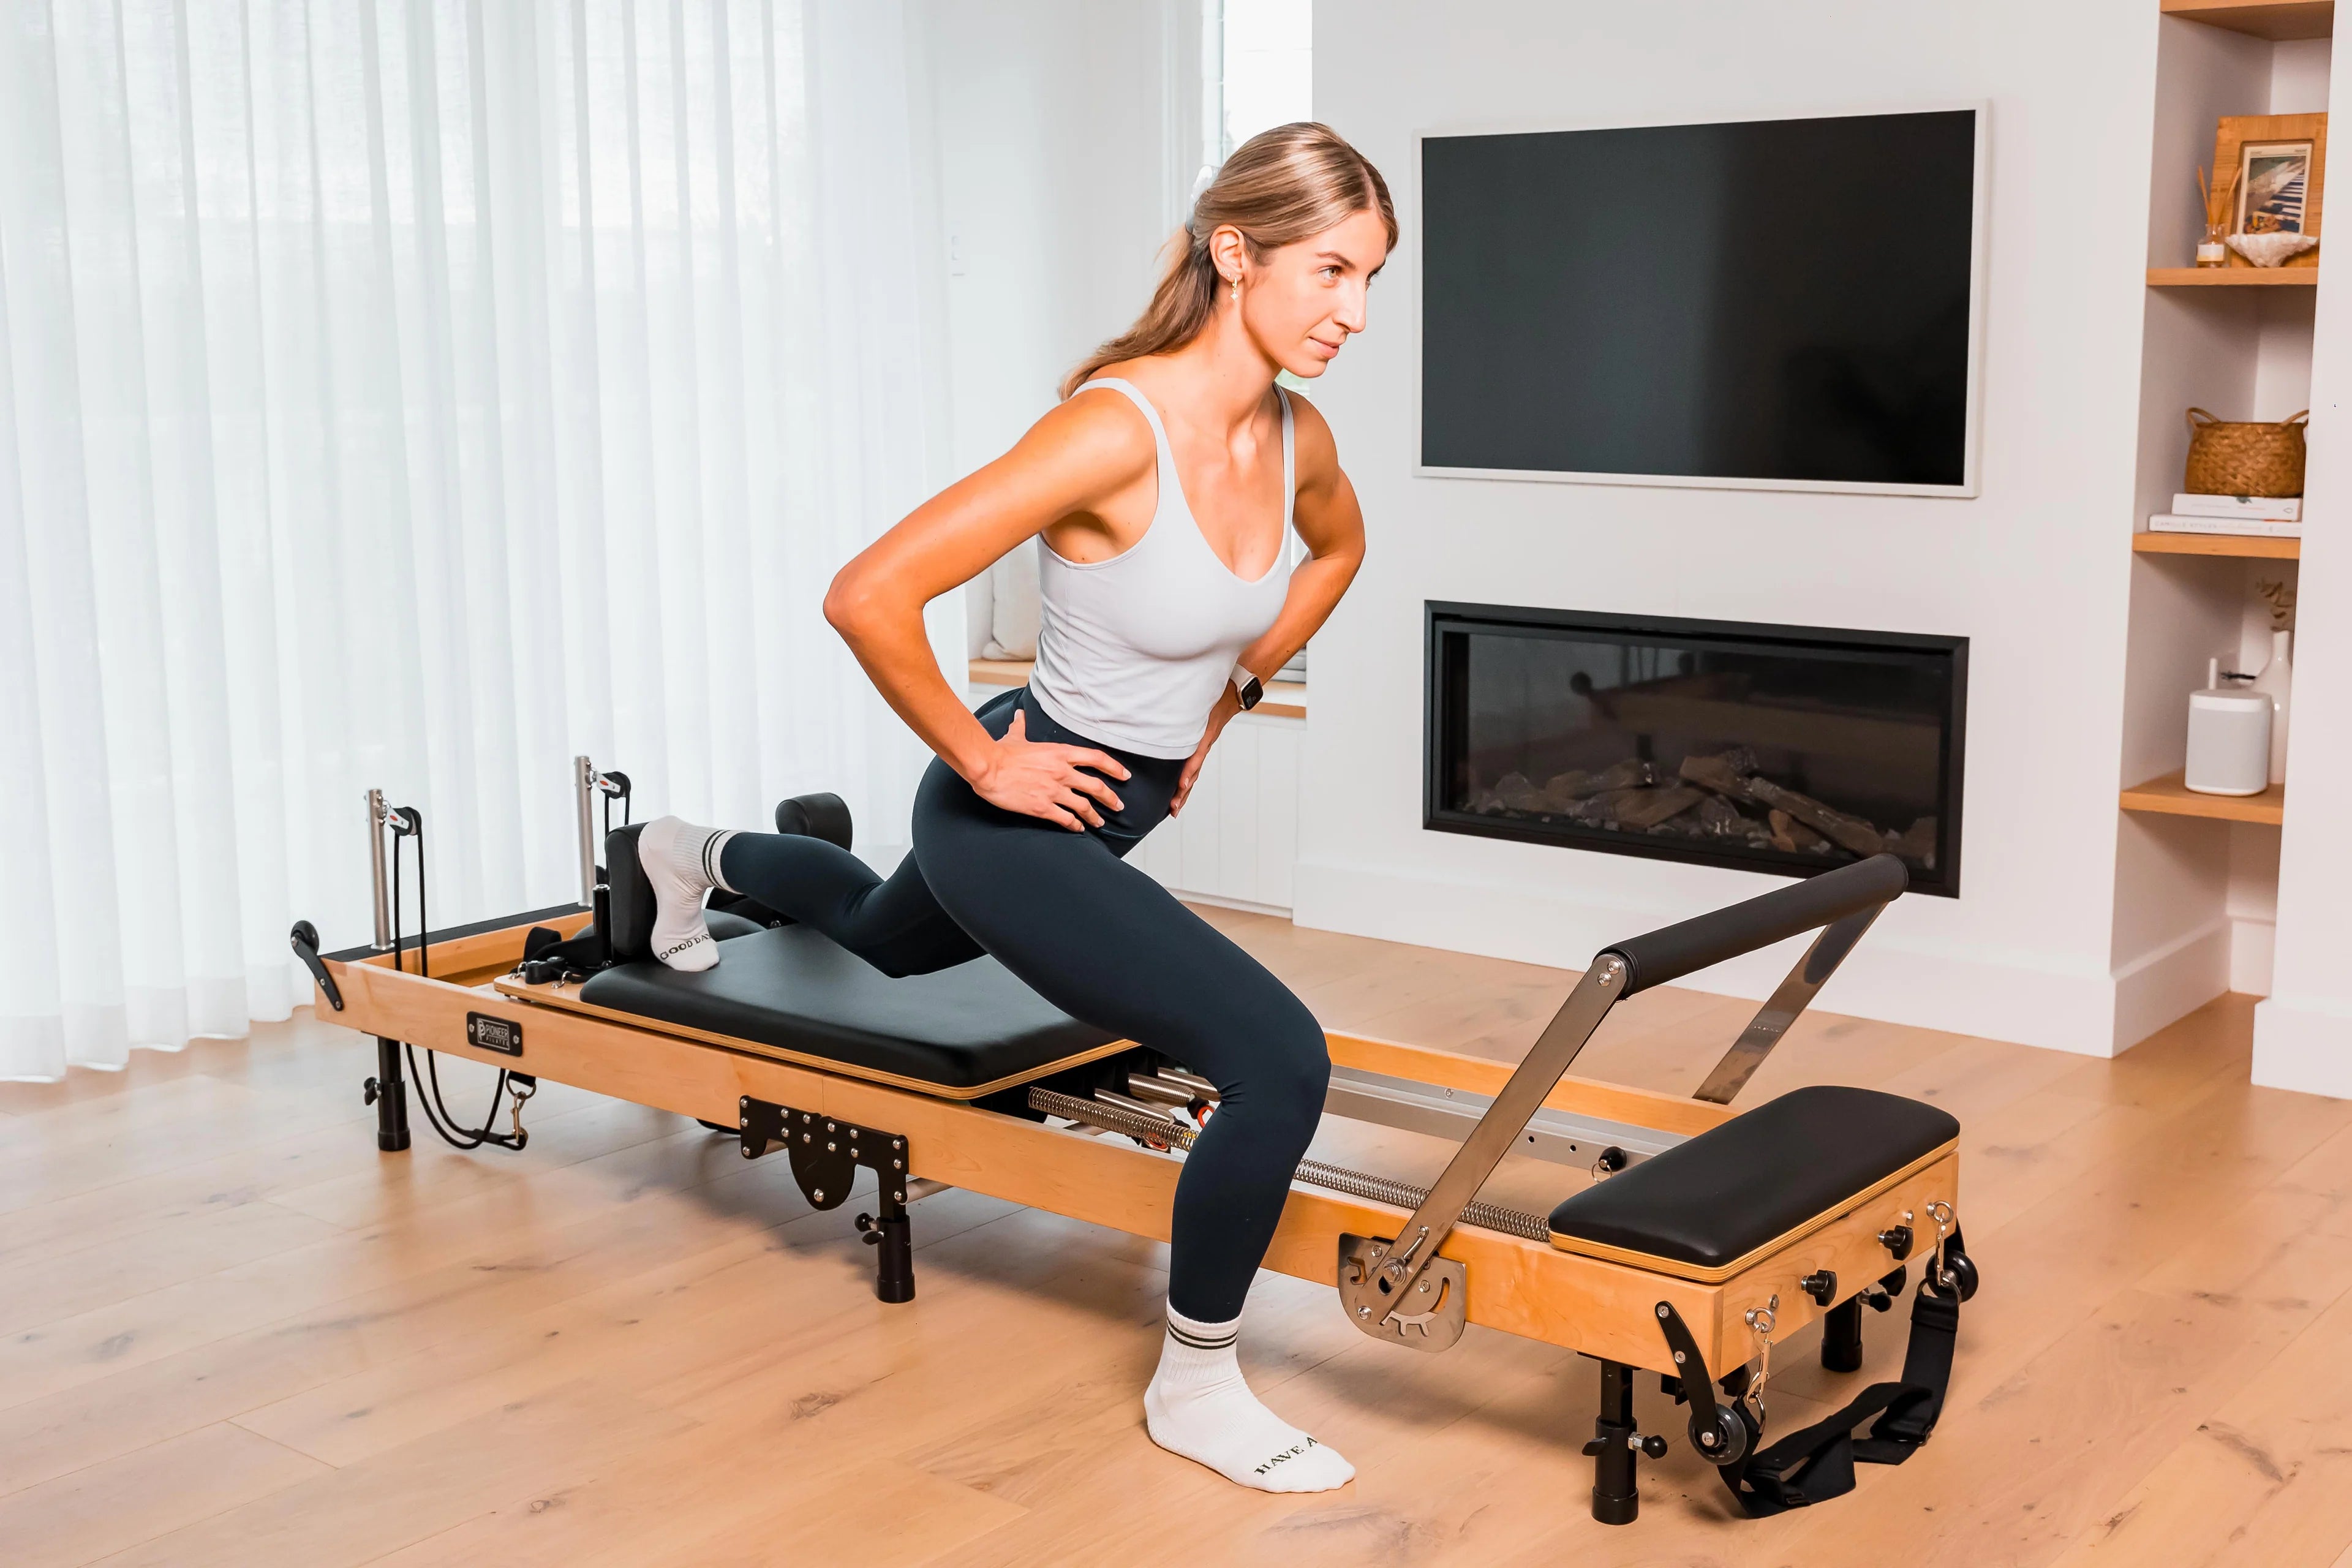 How Much Space Do You Need For A Pilates Reformer?